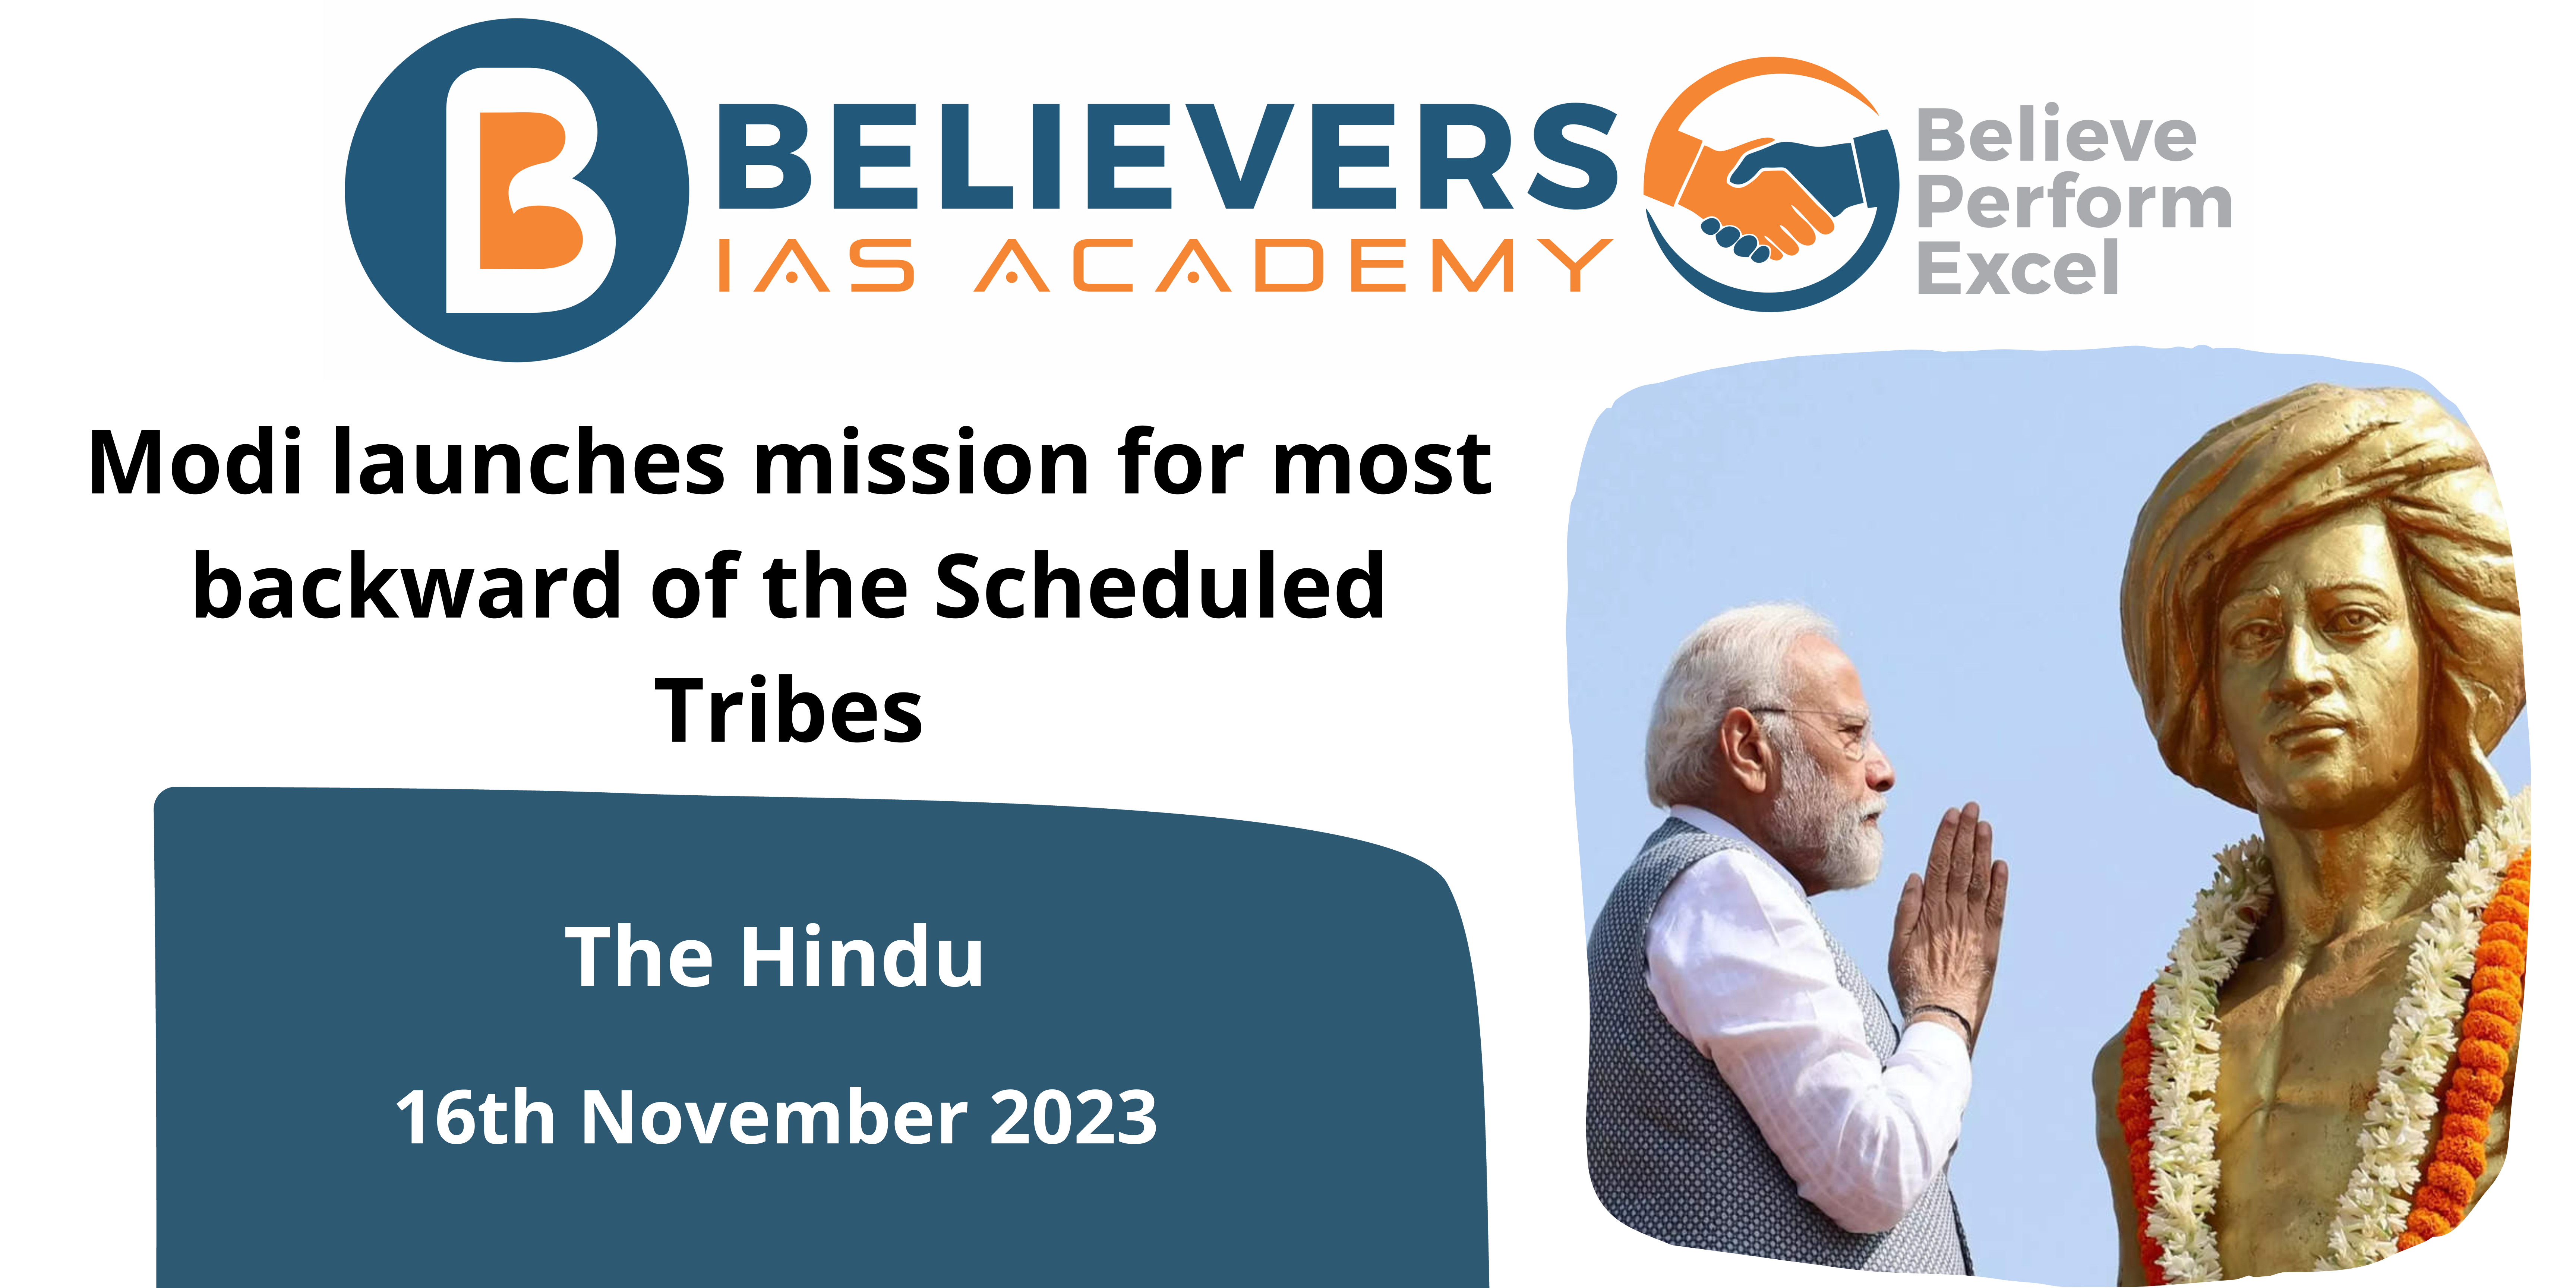 Modi launches mission for most backward of the Scheduled Tribes